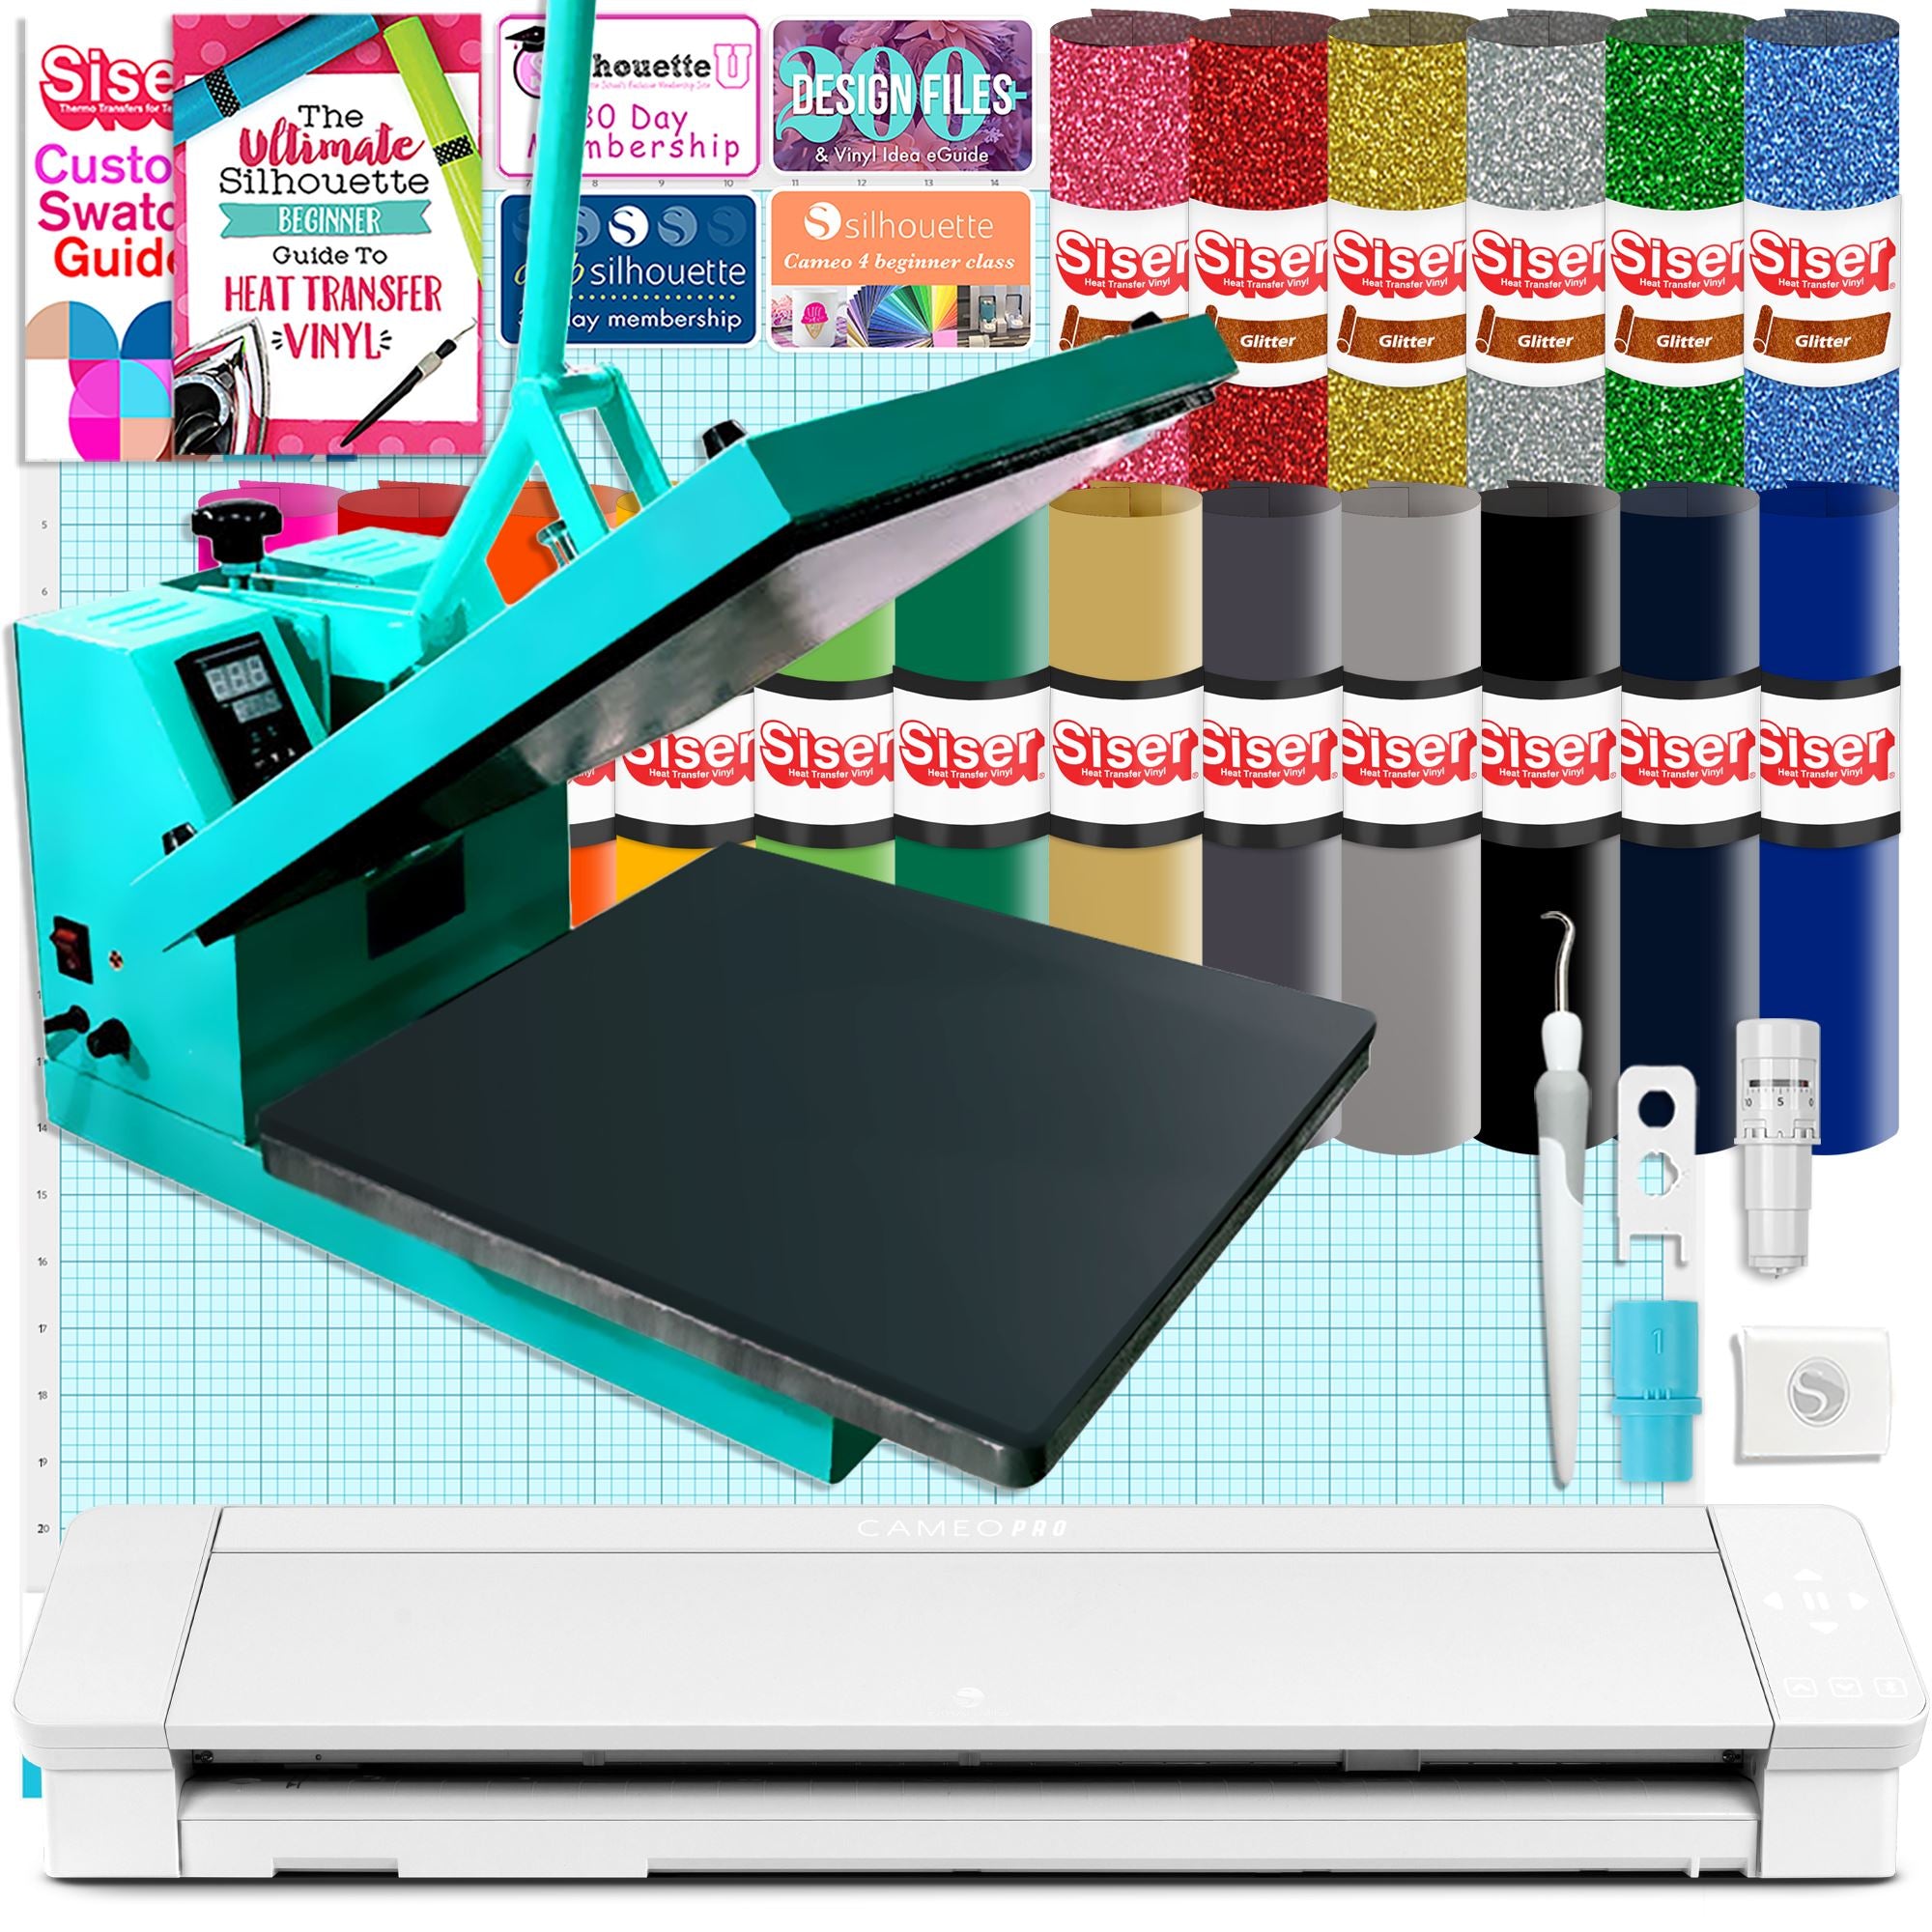 Silhouette White Cameo 4 w/ 15 x 15 Turquoise Slide Out Heat Press Bundle